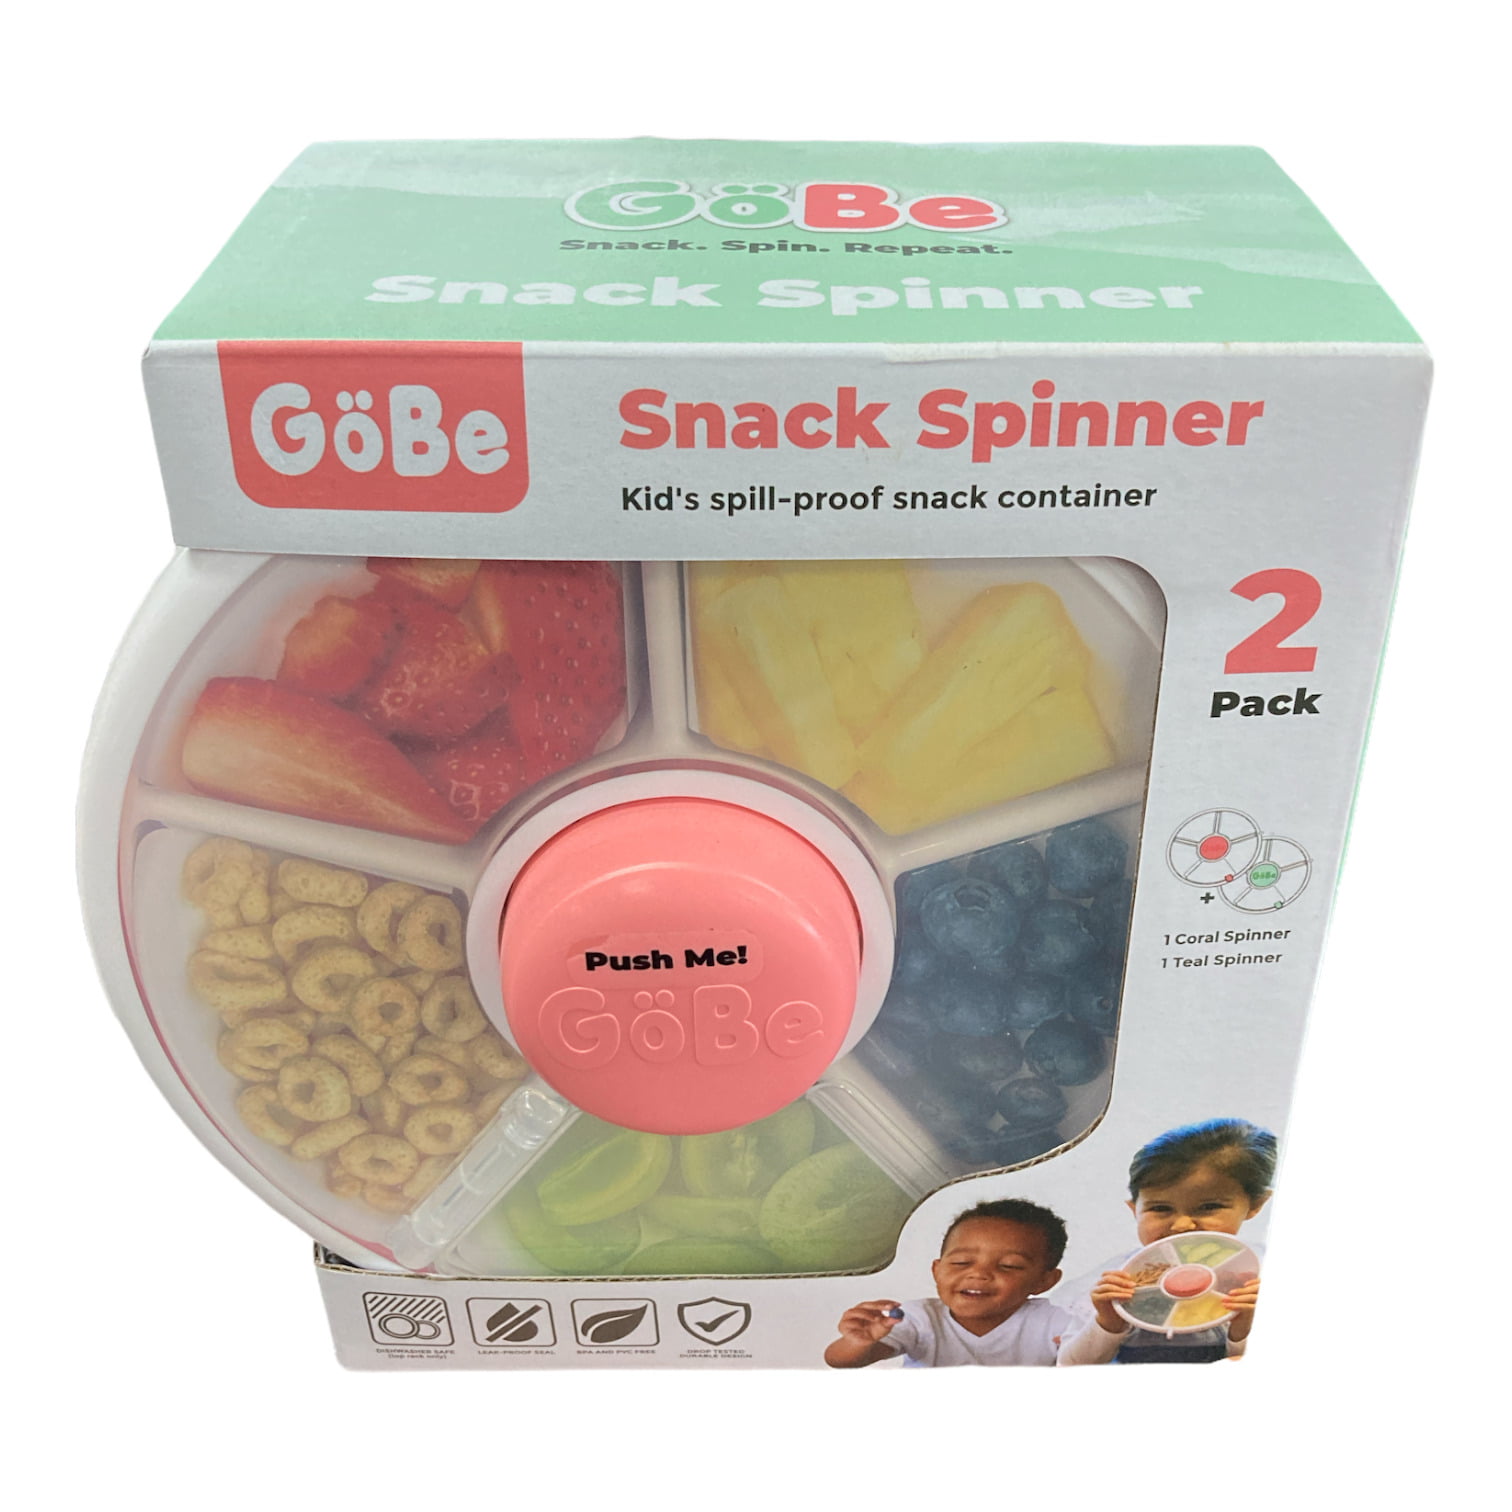 Gobe Snack Spinner Spill Proof Travel Container Dispenser 2-Pack Pink & Teal